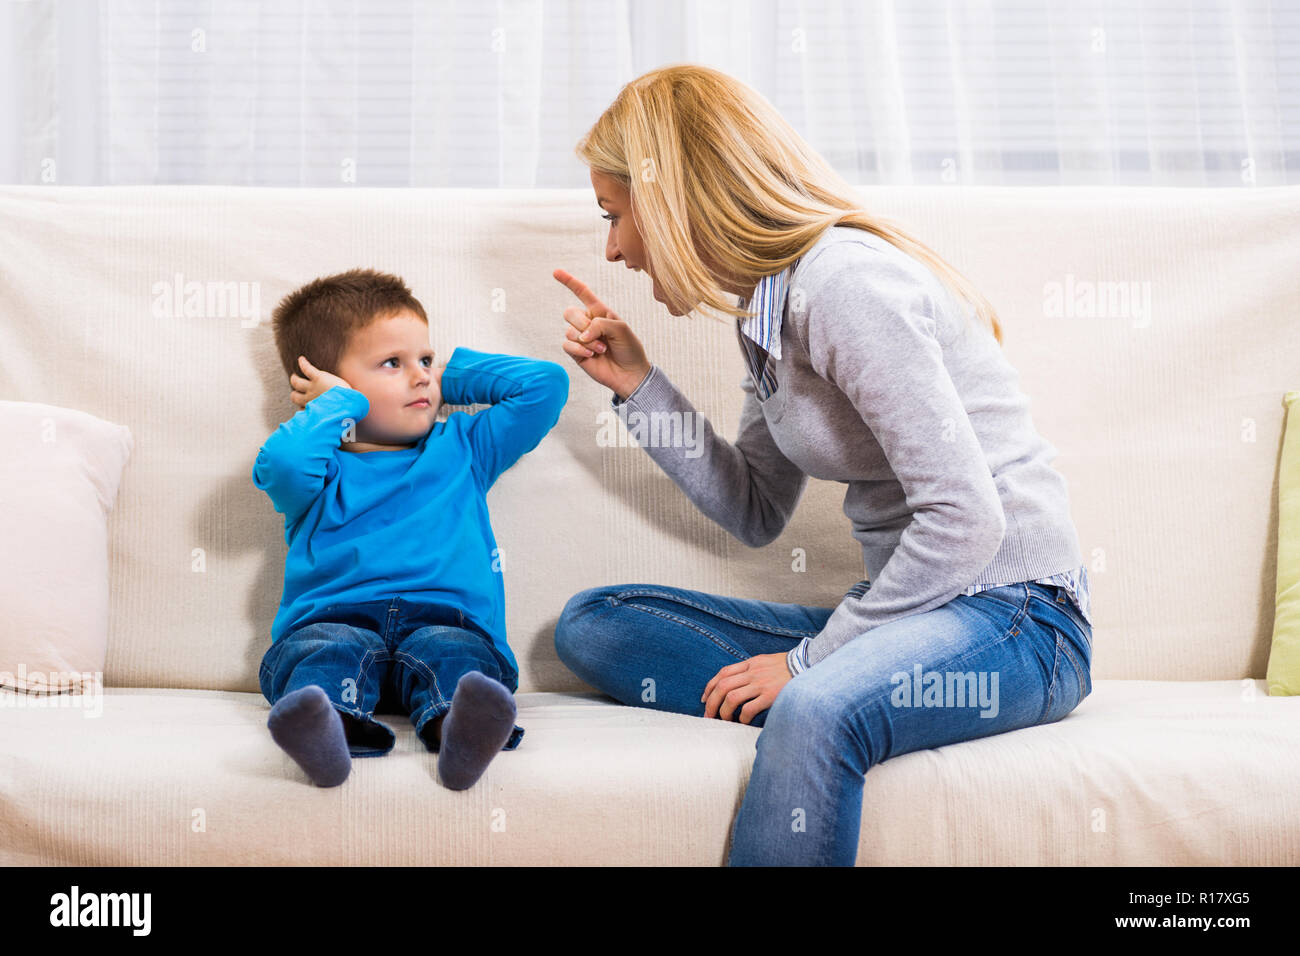 https://c8.alamy.com/comp/R17XG5/angry-mother-is-scolding-at-her-son-R17XG5.jpg